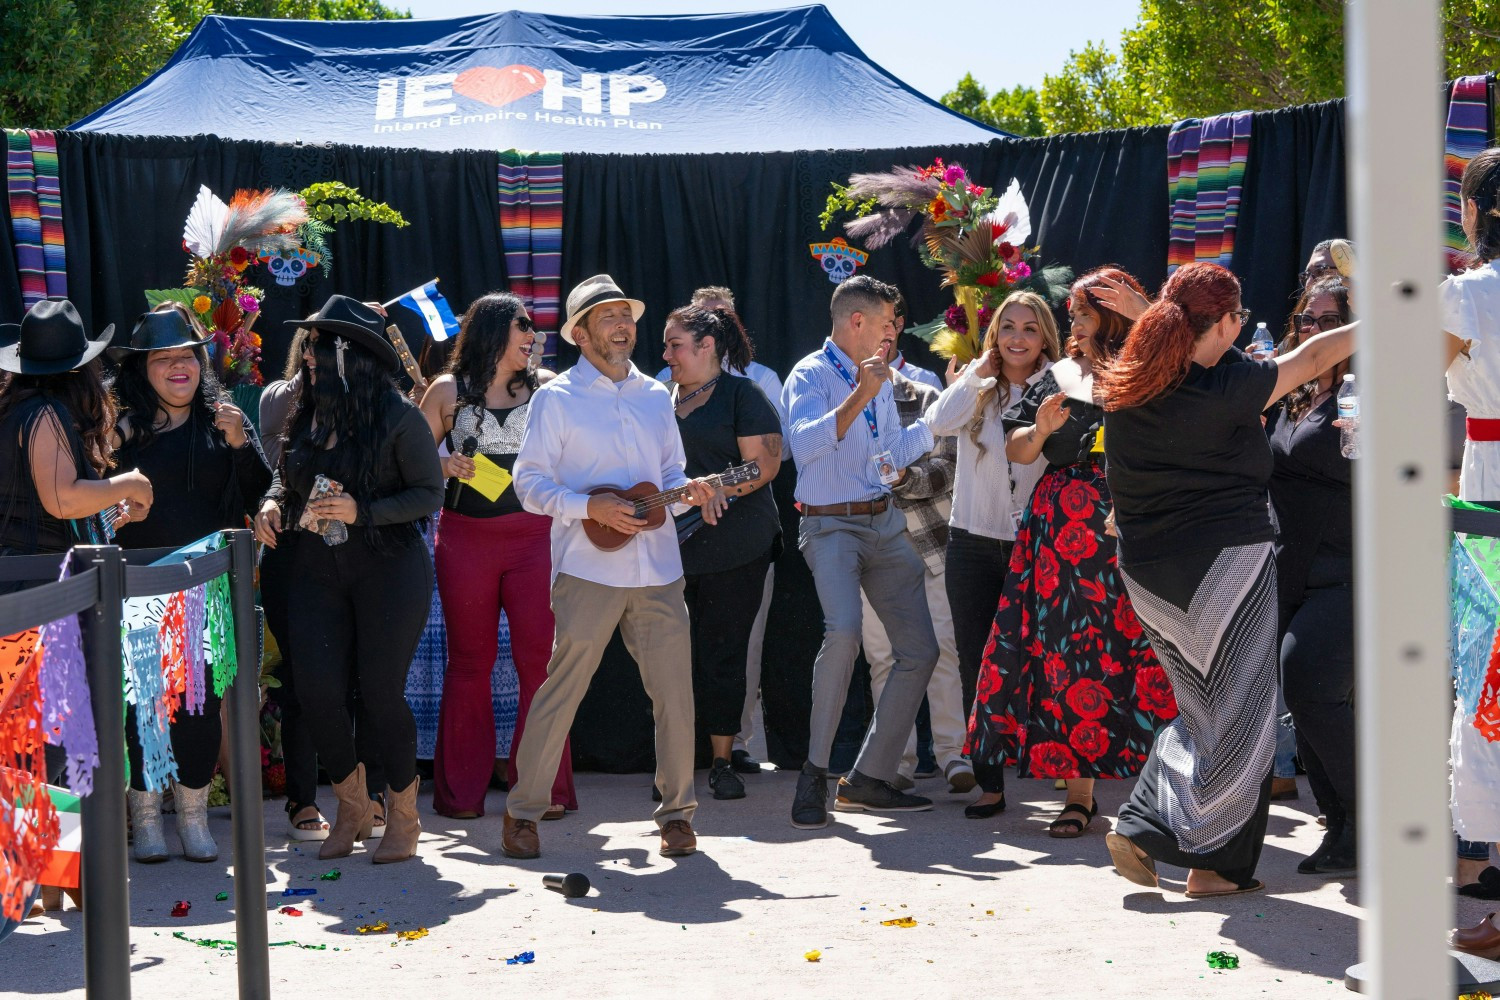 IEHP provided residents in Trona, California, with fresh produce, dental services, vaccines and more.